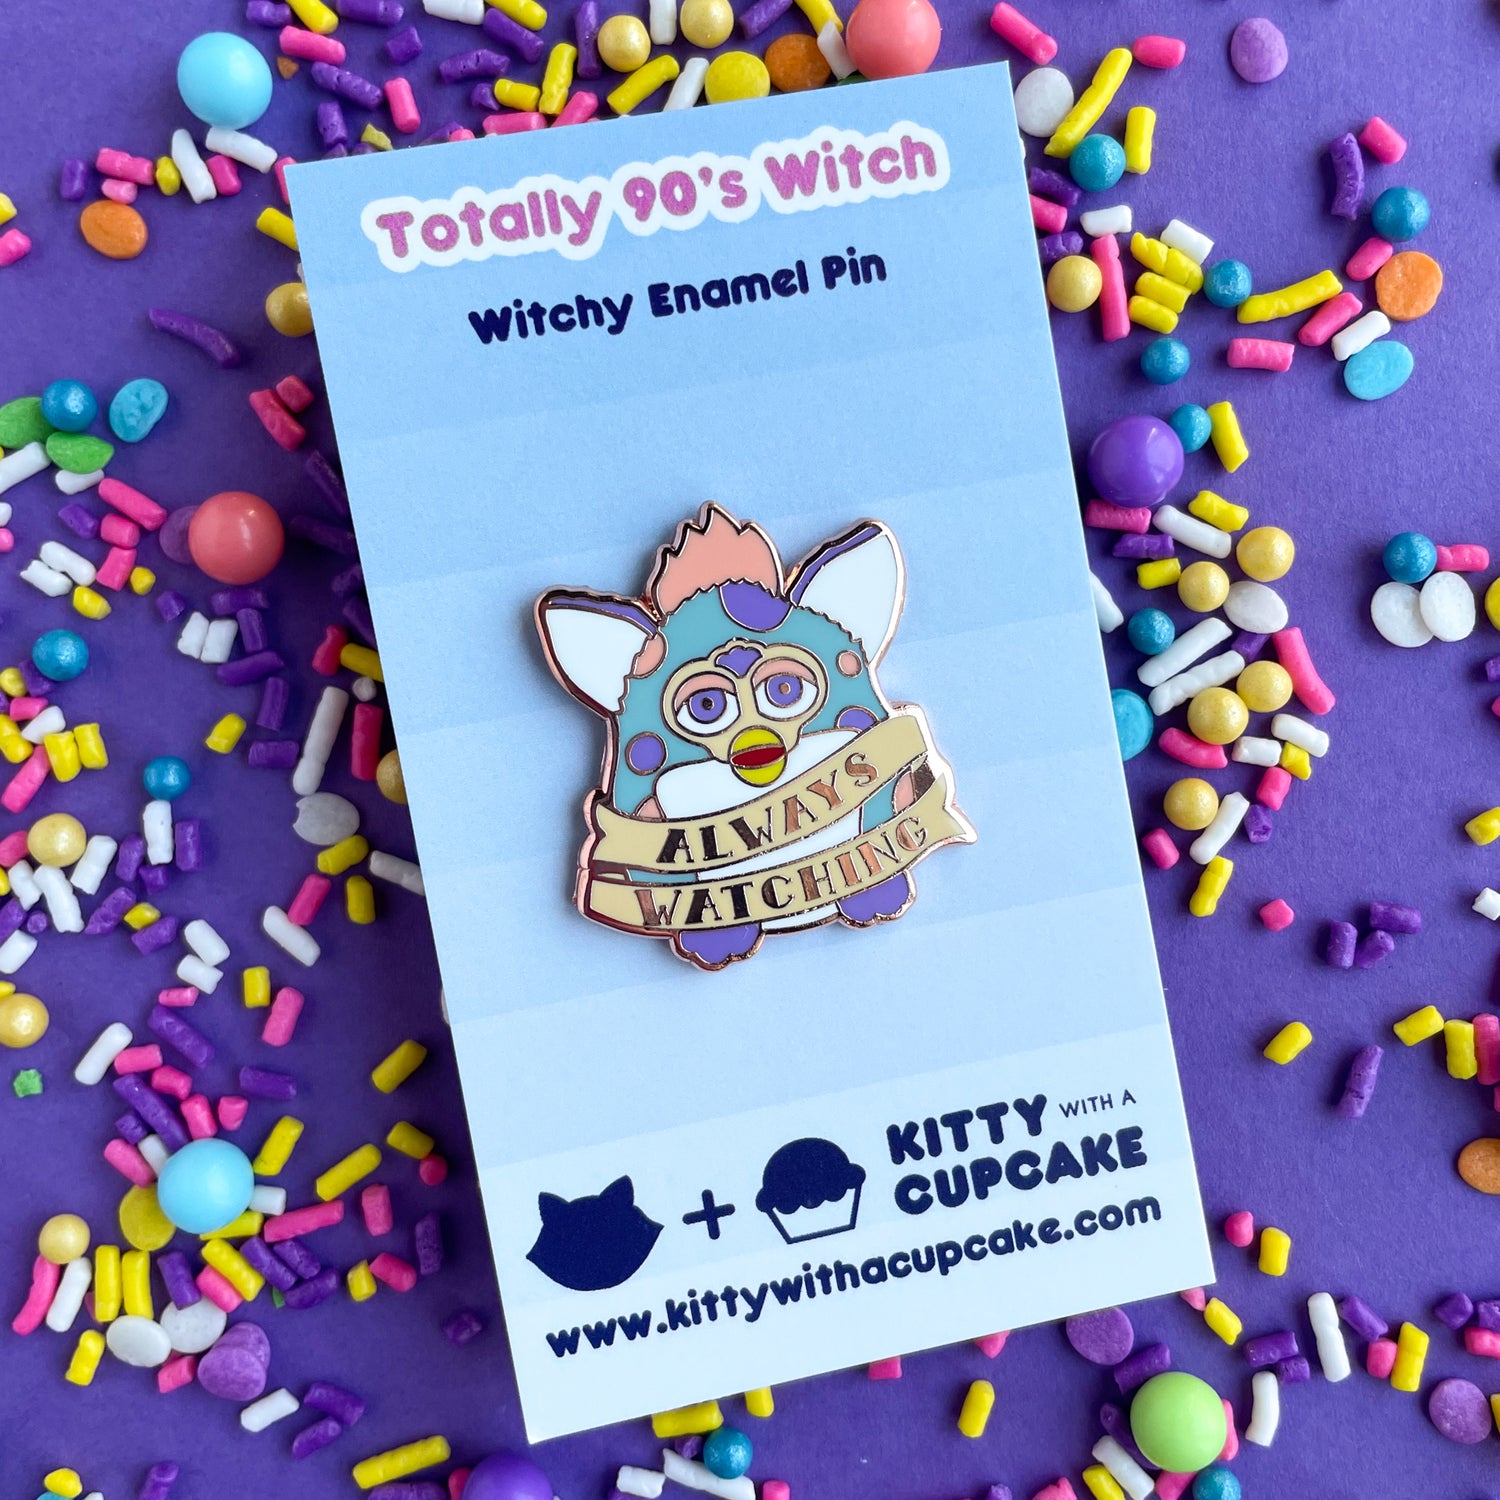 An enamel pin in the shape of a Furby with a tattoo style banner around its body that says "Always Watching". The Furby is light blue with peach and lavender spots. The pin is on a backing card that reads "Totally 90's Witch" on a purple paper background that is covered in sprinkles.